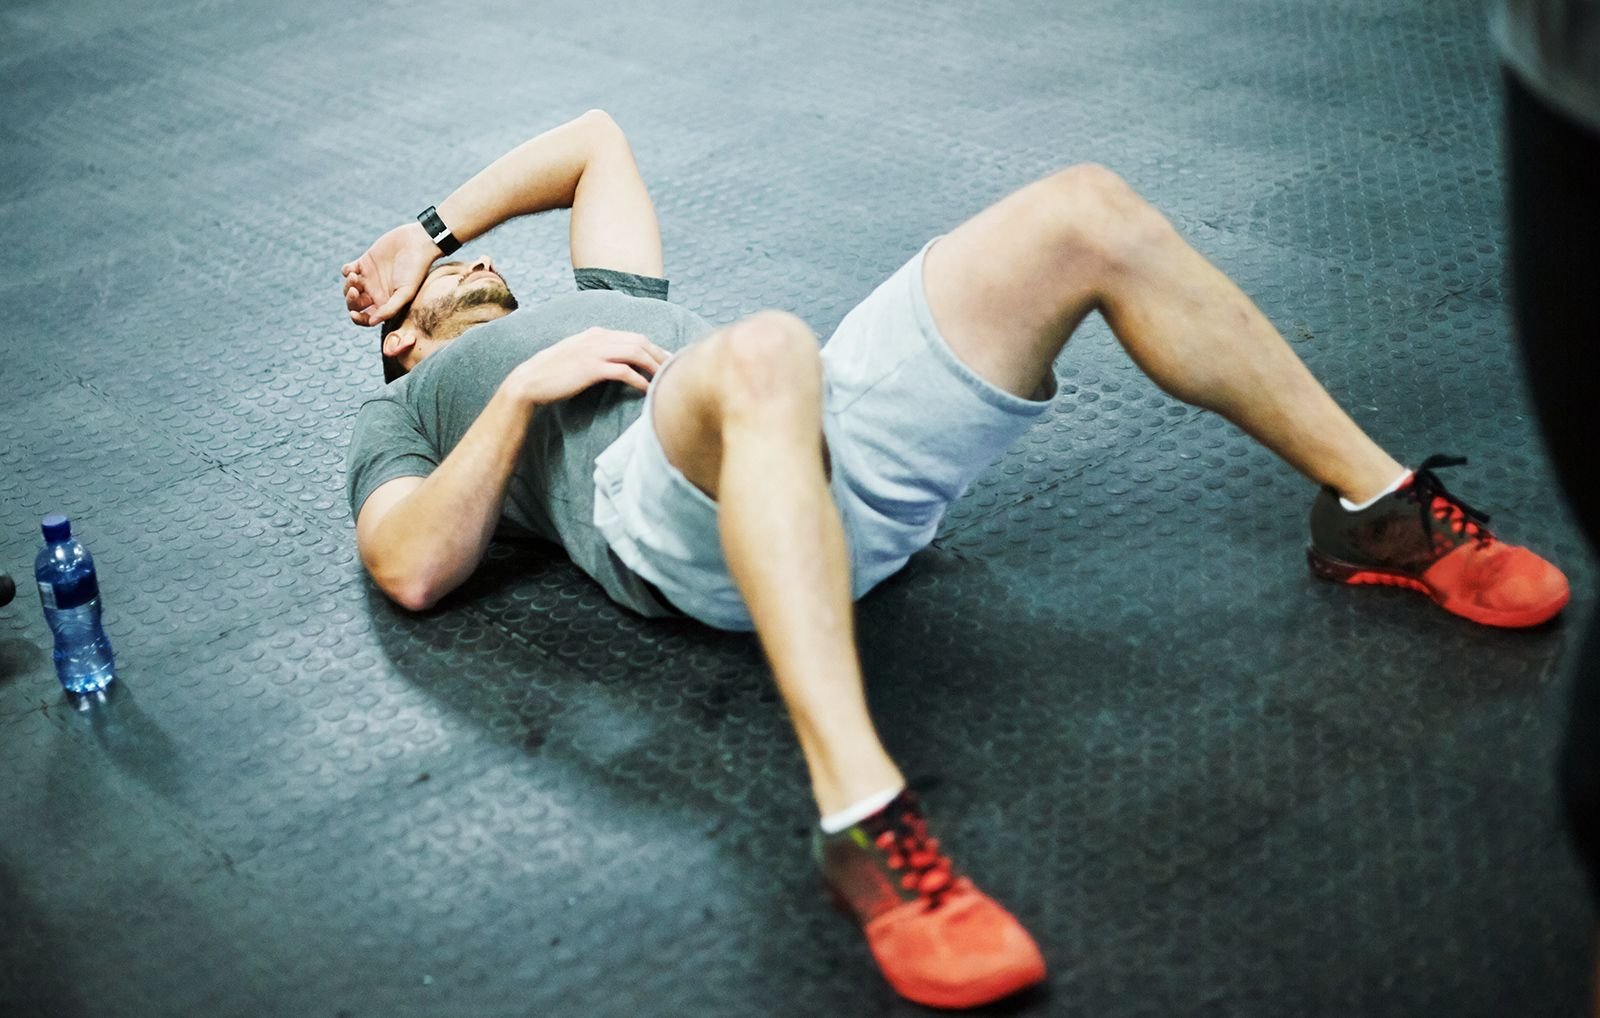 Body workouts : 3 reasons to not exercise too hard